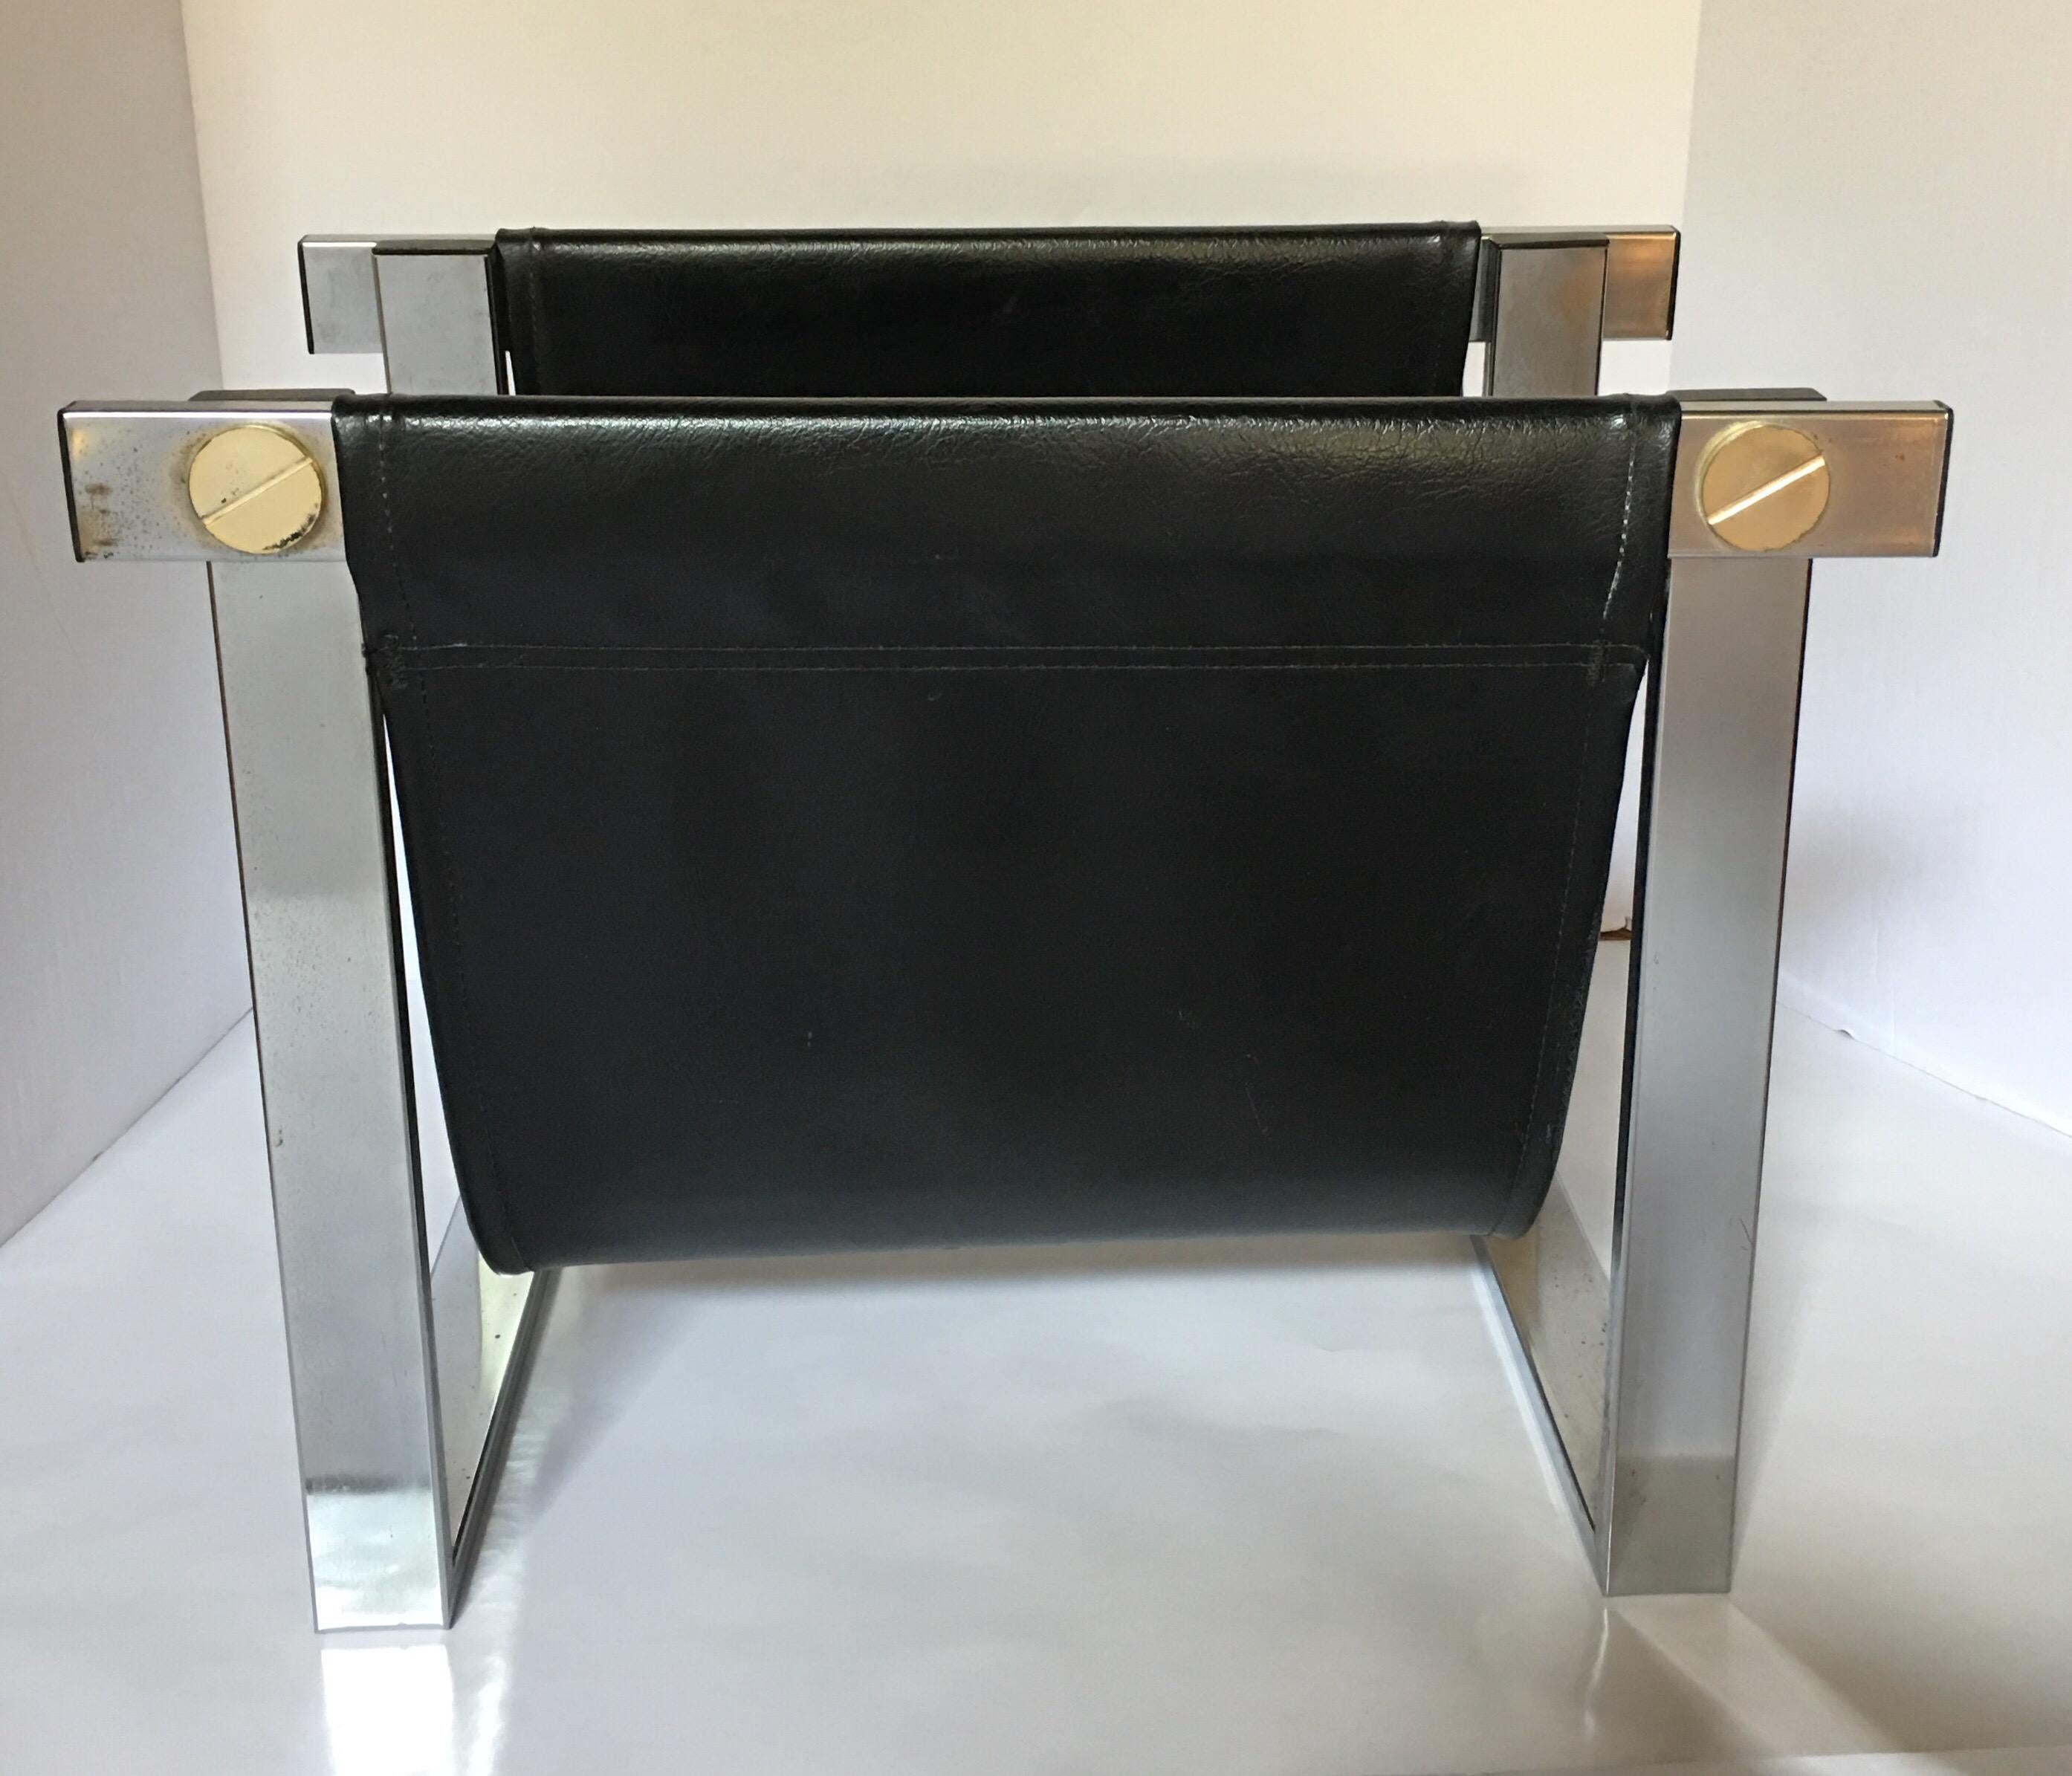 Mid-Century Modern magazine rack holder featuring a polished chrome frame with a faux black leather sling and oversized decorative gold tone hardware/screws. In the style of William Plunkett.